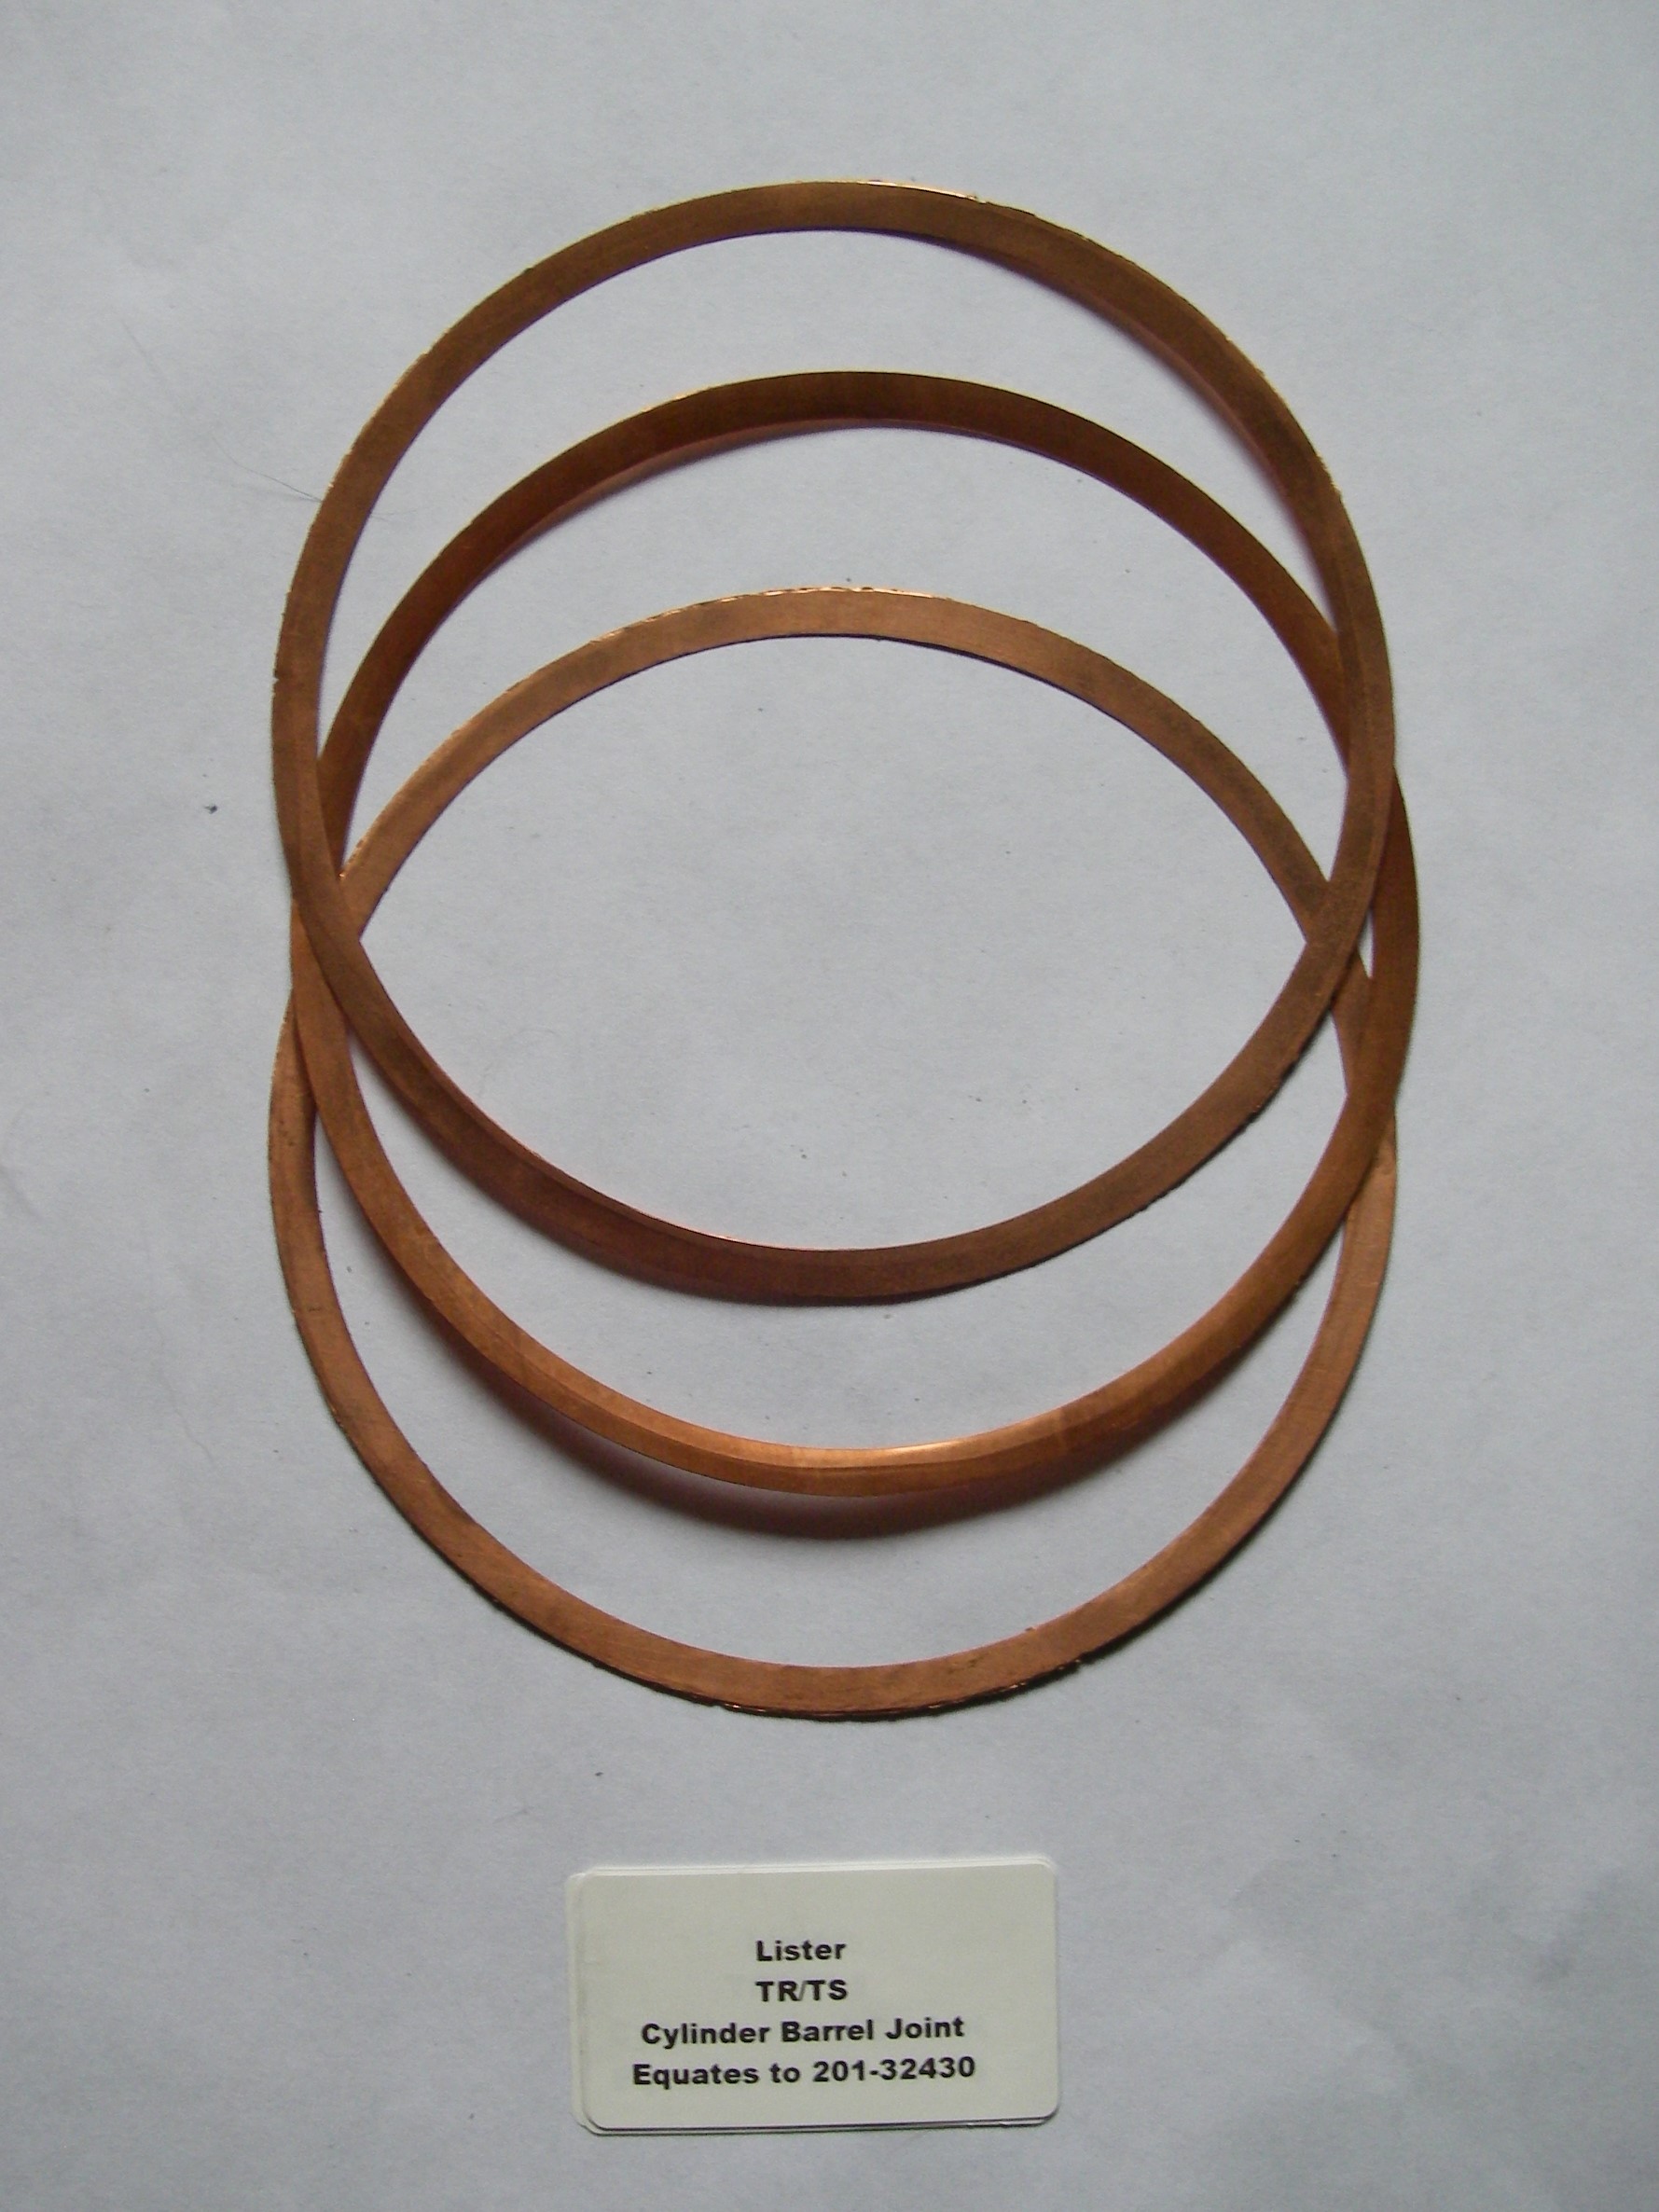 <b>Compatible with the Lister TR3 & TS3 Eng. - Copper Cylinder Barrel Joint Gaskets</b>